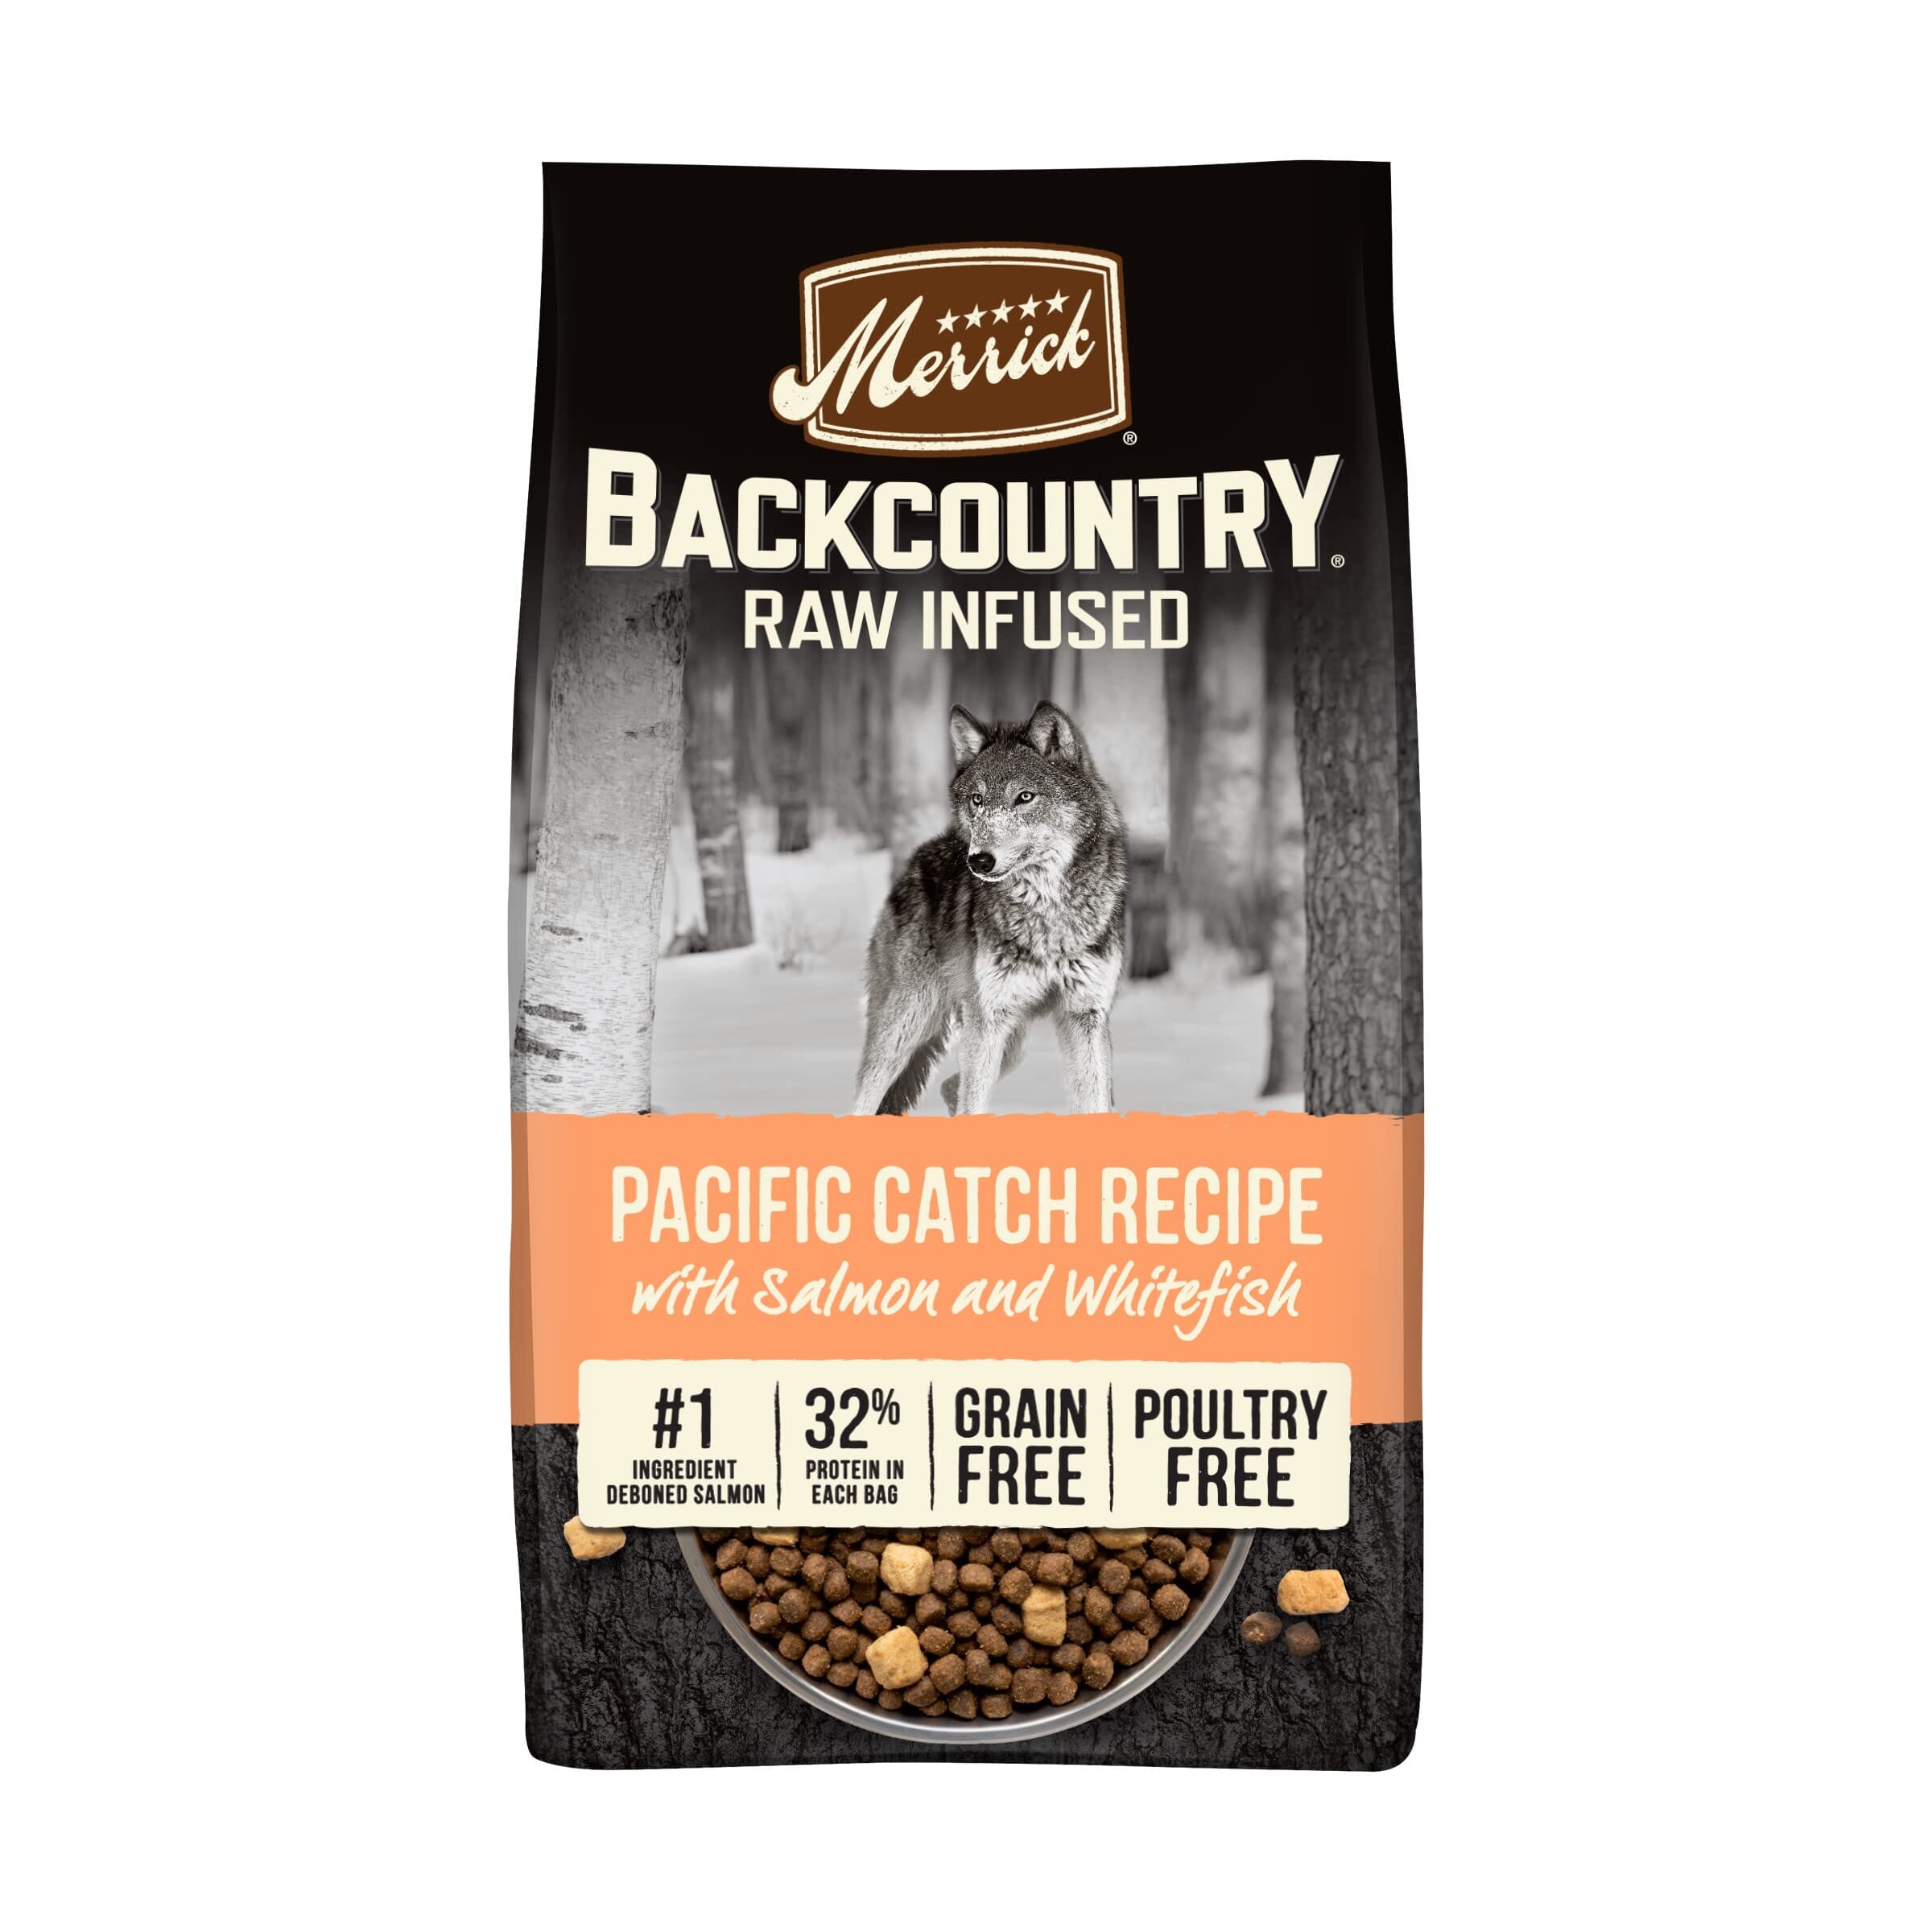 Merrick Backcountry Pacific Catch Grain-Free Raw-Infused Salmon and Whitefish Dry Dog Food - 20 Lbs  